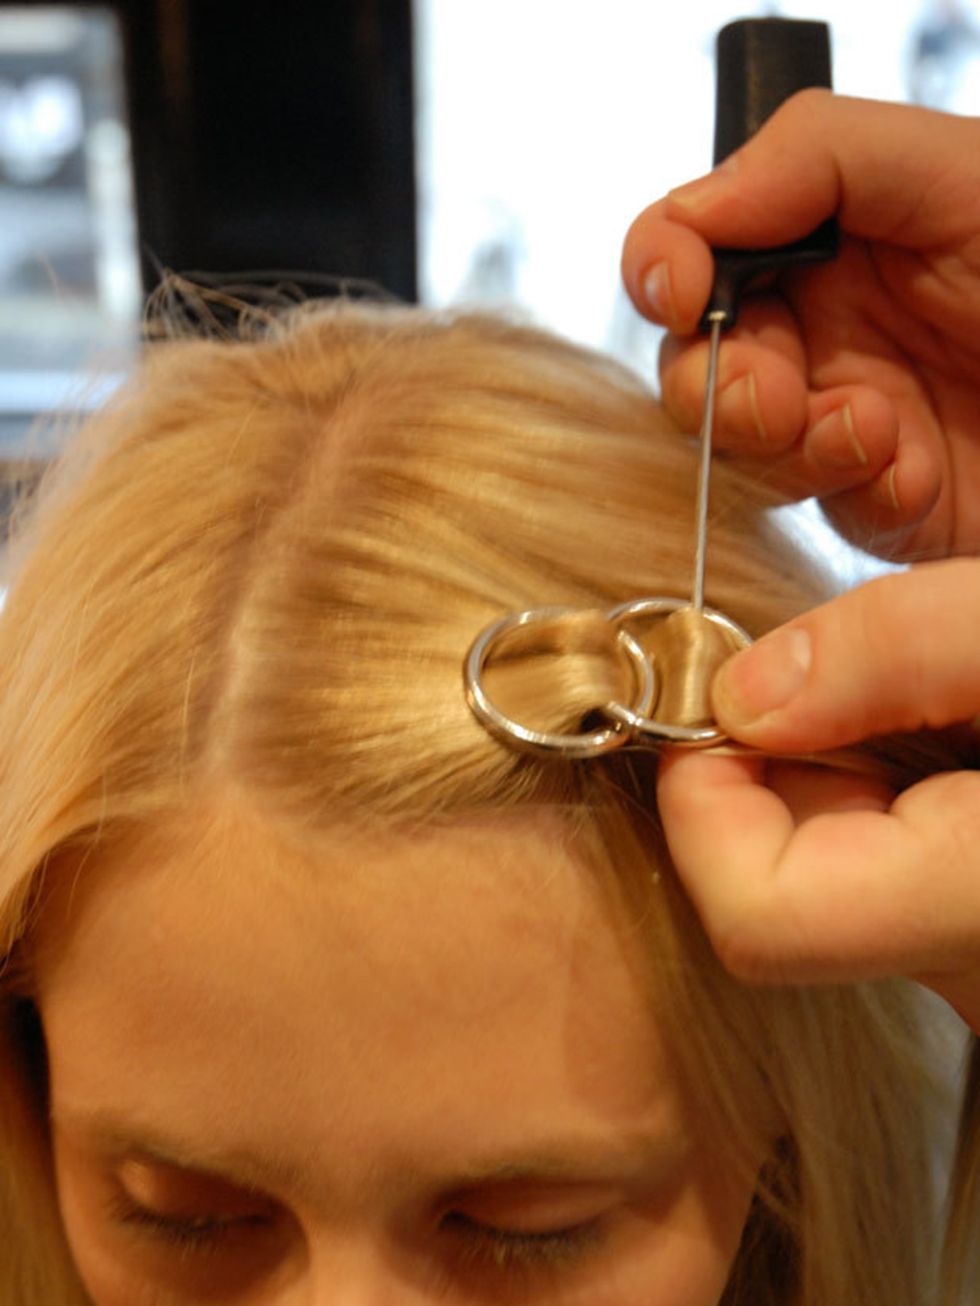 &lt;p&gt;&lt;strong&gt;Step eight:&lt;/strong&gt; Flatten the hoop that is sitting up down in the direction away from your parting and feed the hair under the first hoop and over the flattened hoop.&lt;/p&gt;